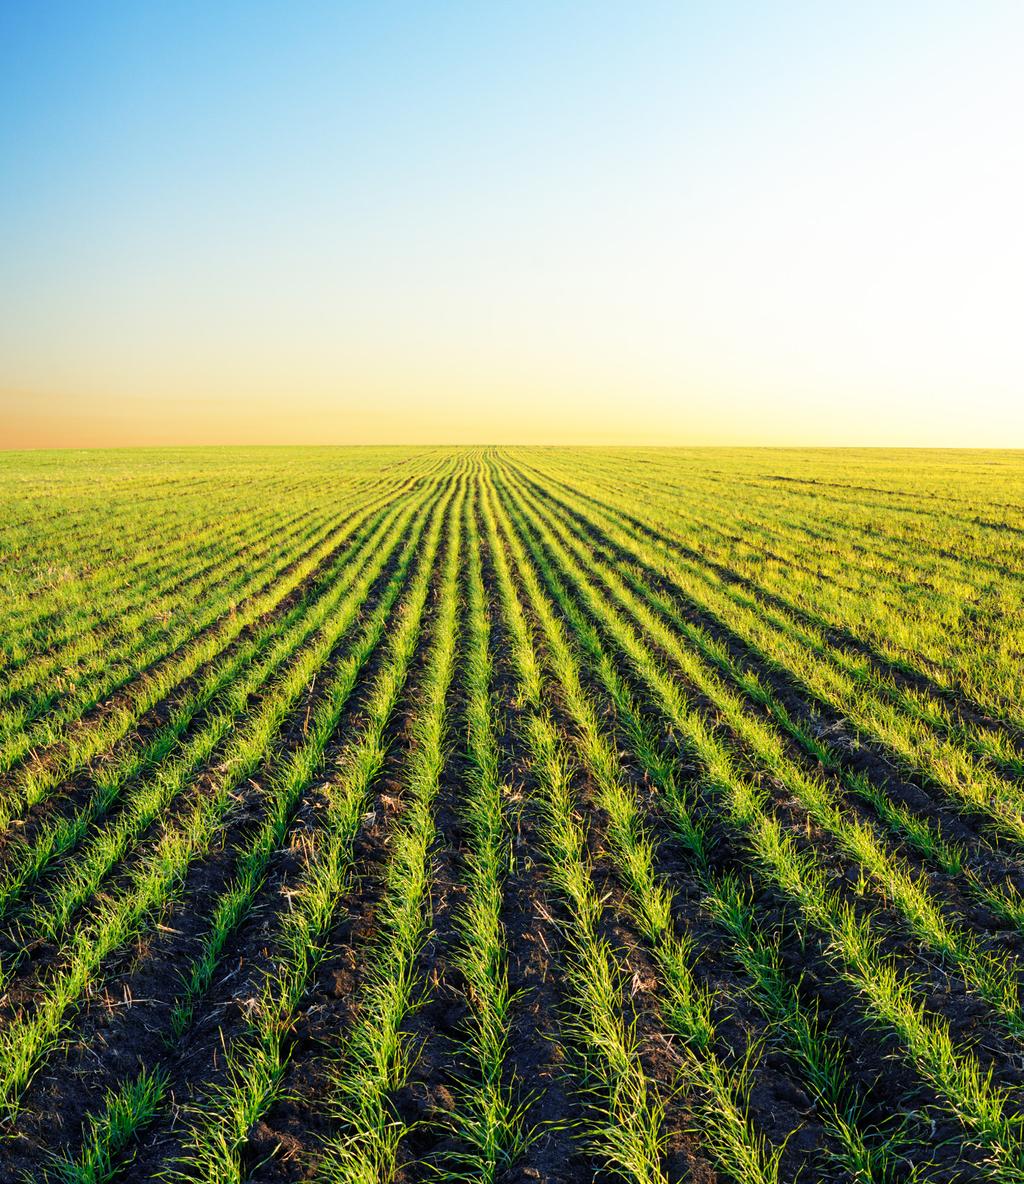 A look around the world The Black Sea region specifically Ukraine and Russia have favorable soil moisture and winter grain crops that are in good condition.